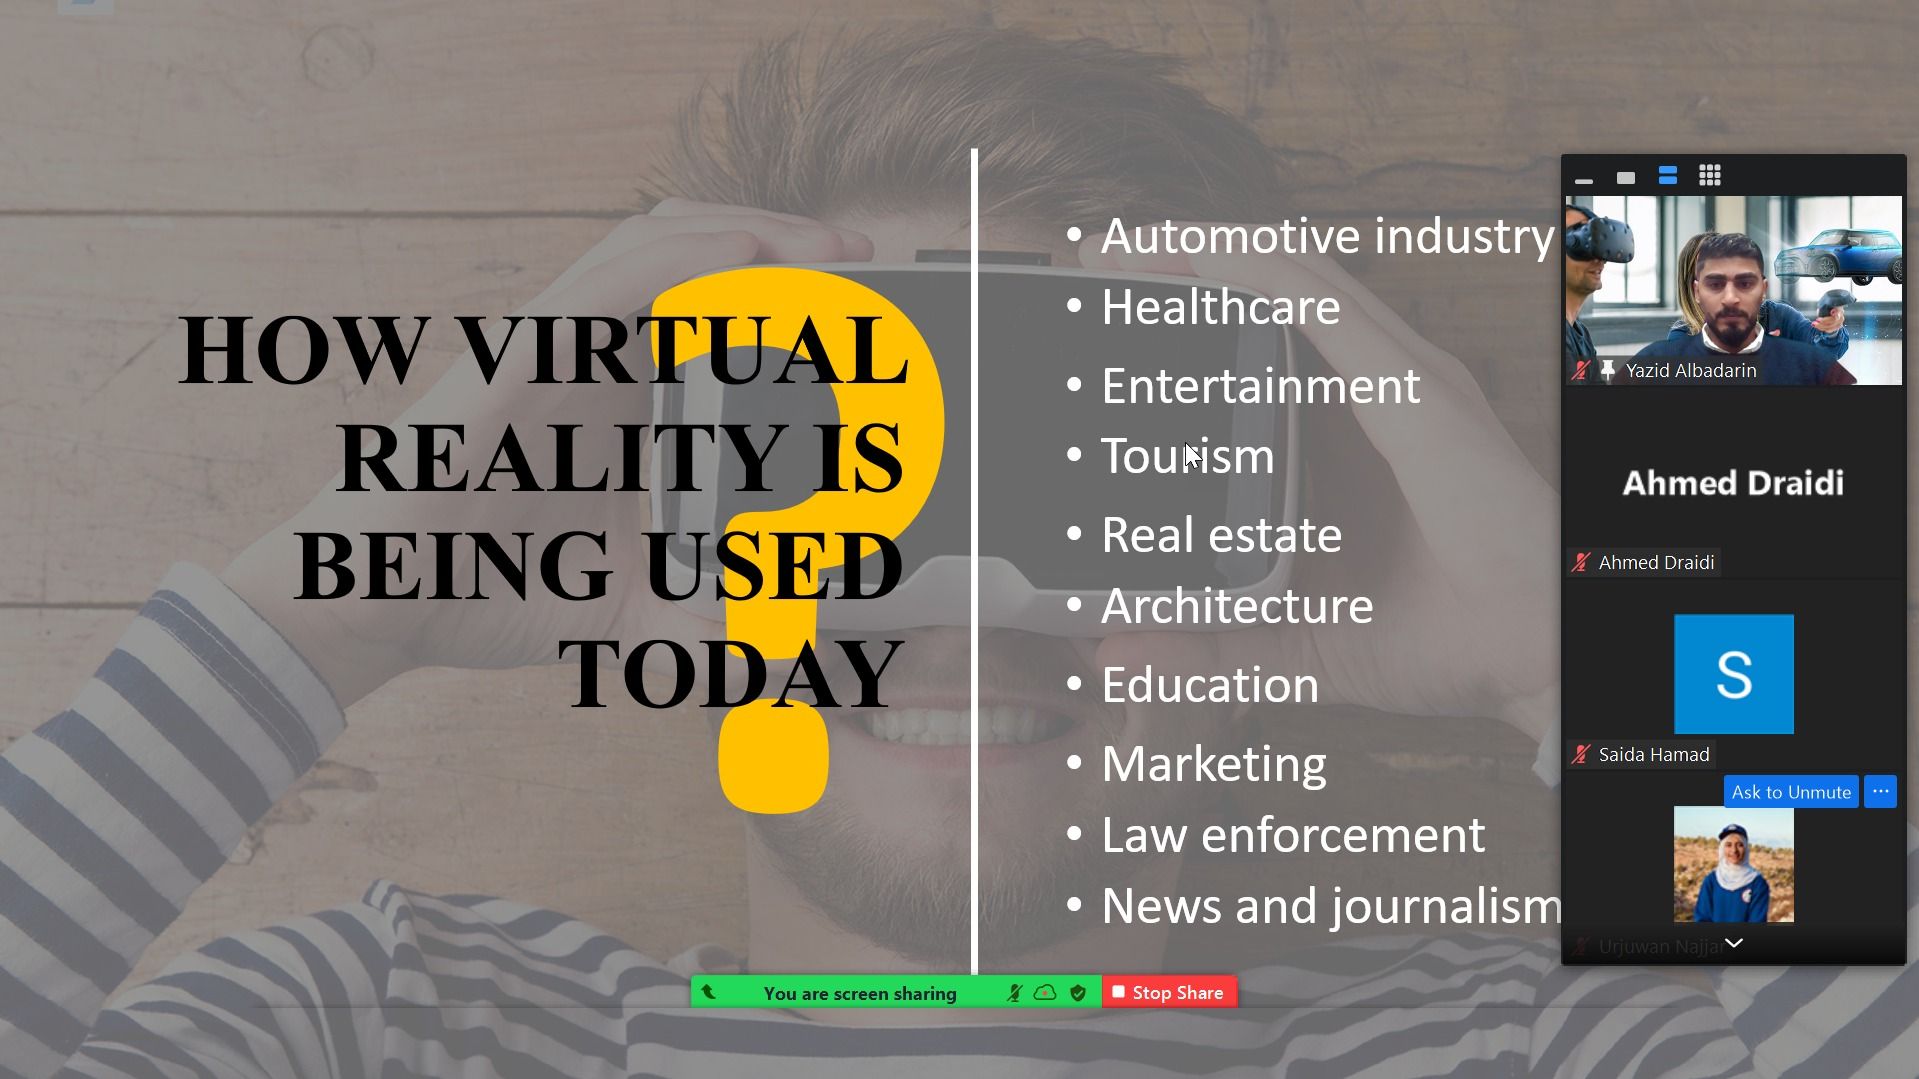 Powerpoint slide, “How Virtual Reality is being used today: Automotive industry, health care, entertainment, tourism, real estate, architecture, education, marketing, law enforcement, news and journalism”